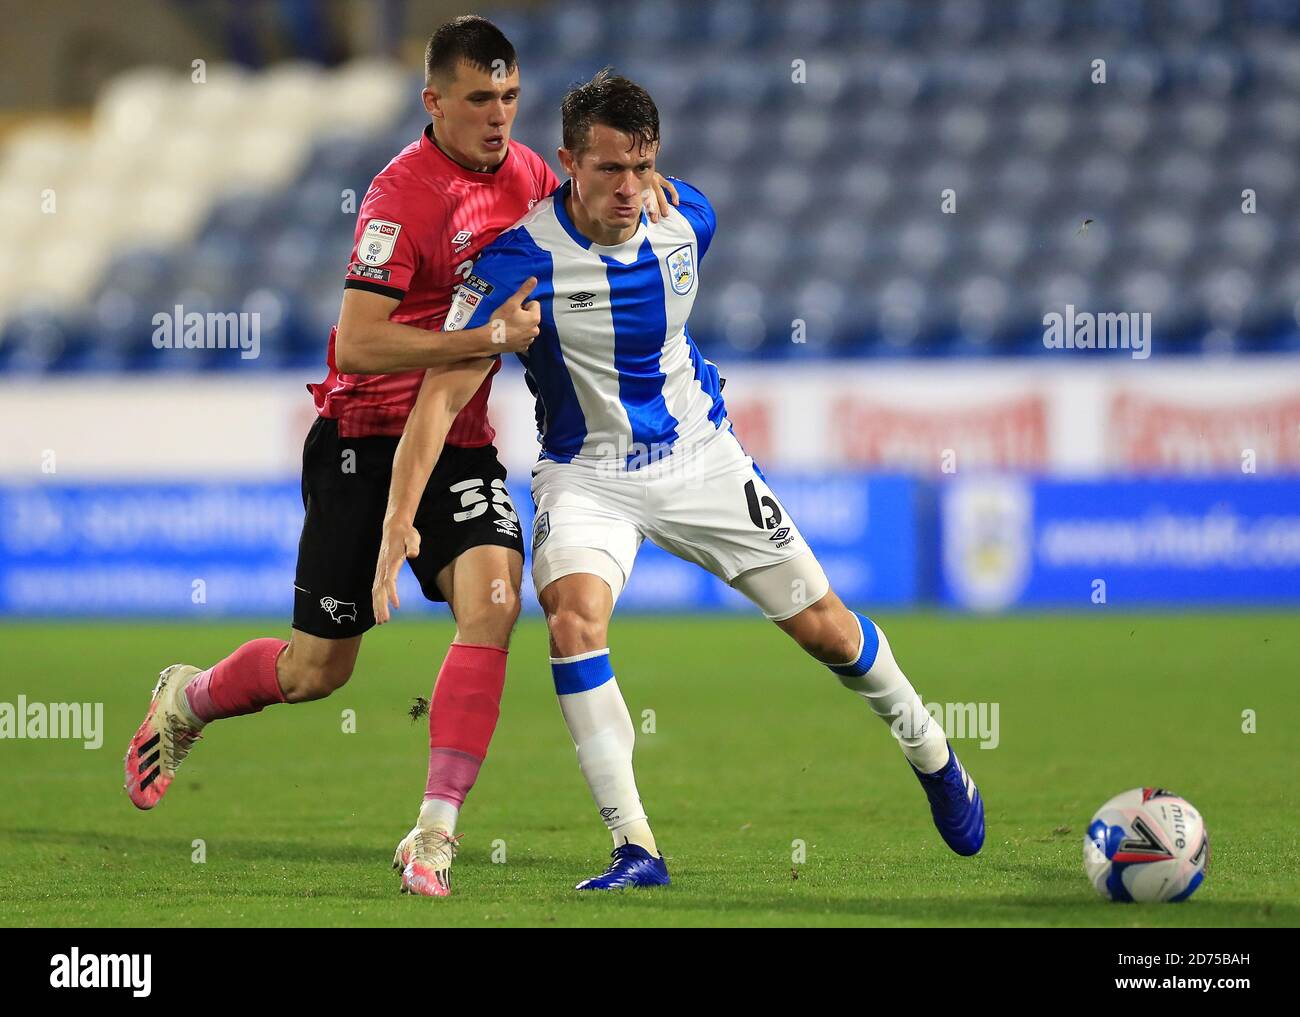 Derby County's Jason Knight (left) and Huddersfield Town's Jonathan Hogg battle for the ball during the Sky Bet Championship match at The John Smith's Stadium, Huddersfield. Stock Photo